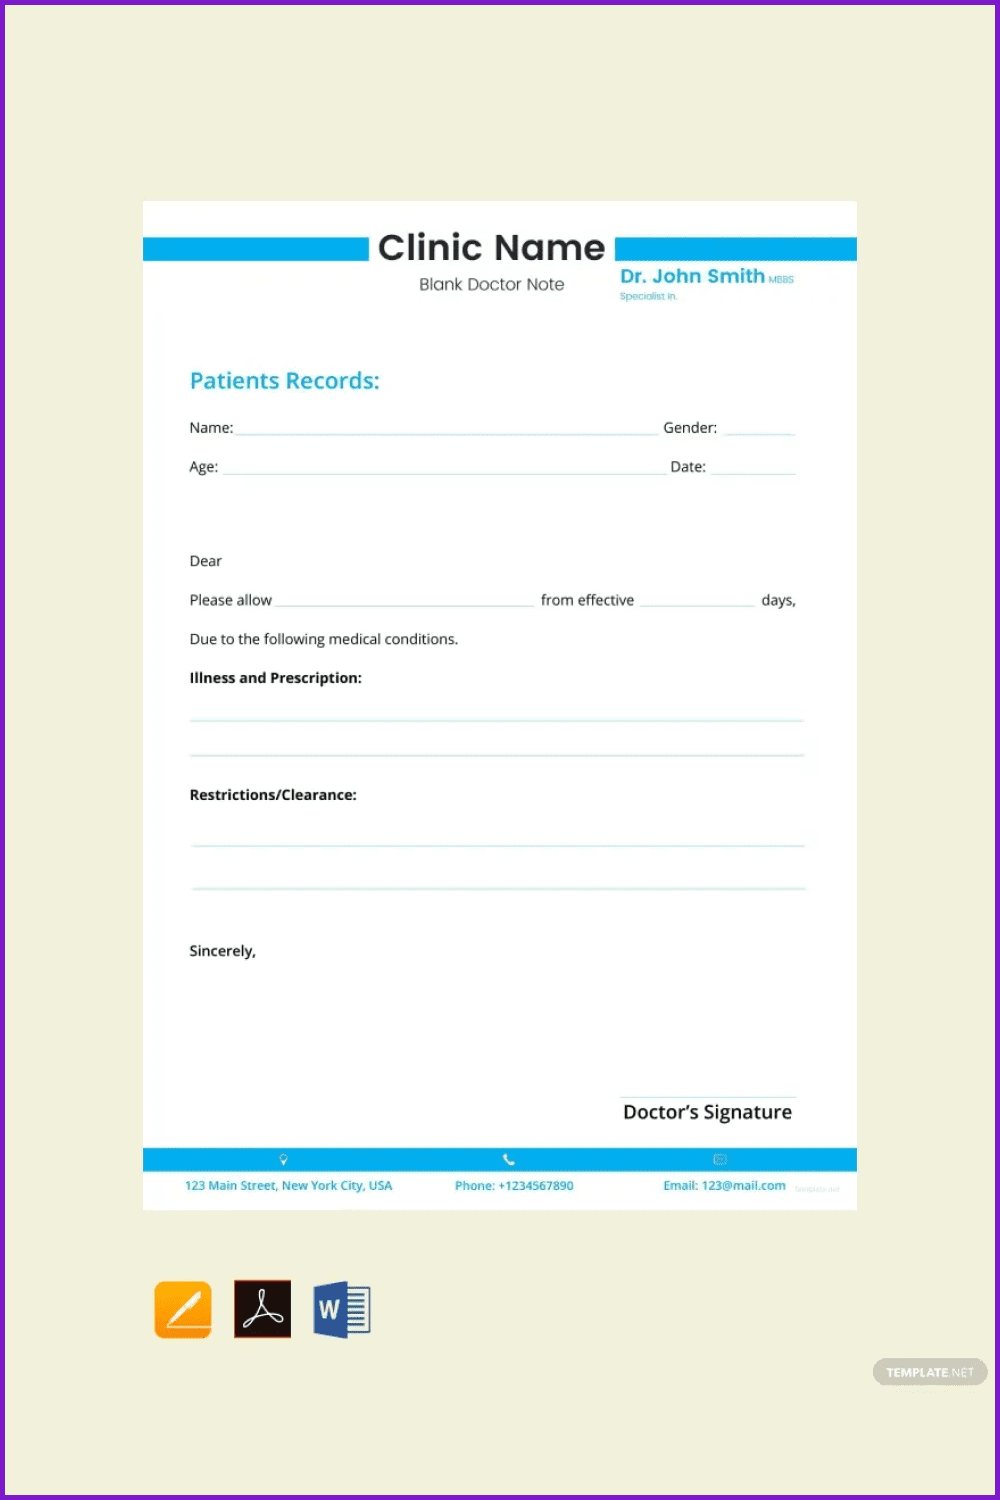 Sample Blank Doctor Note Template.